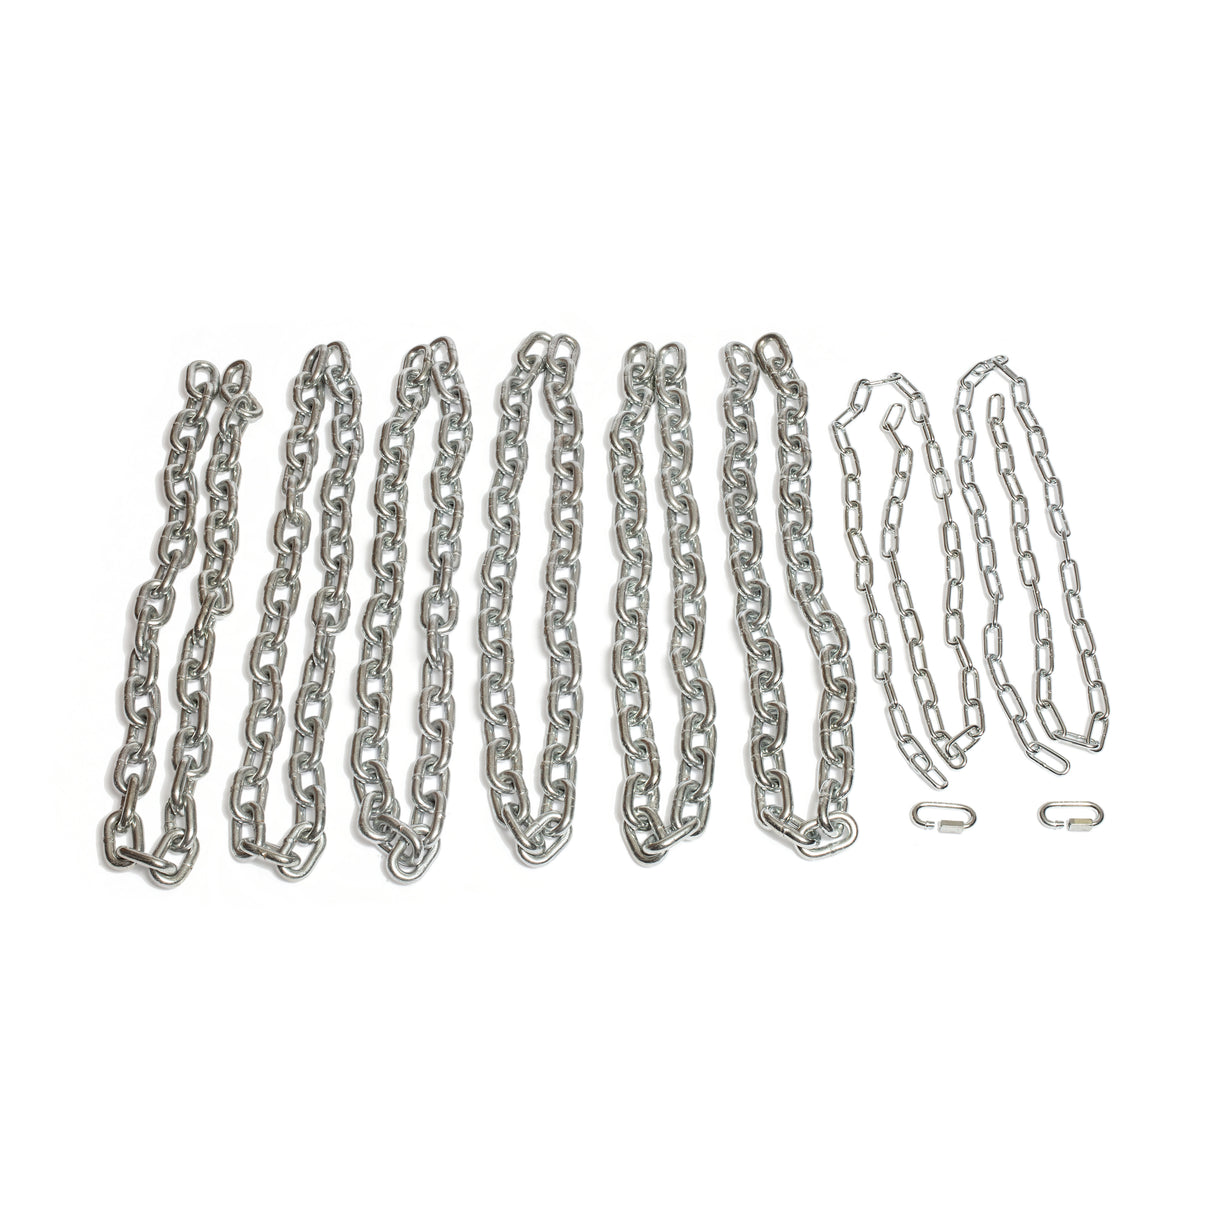 Different sizes and types of zinc-plated chains 